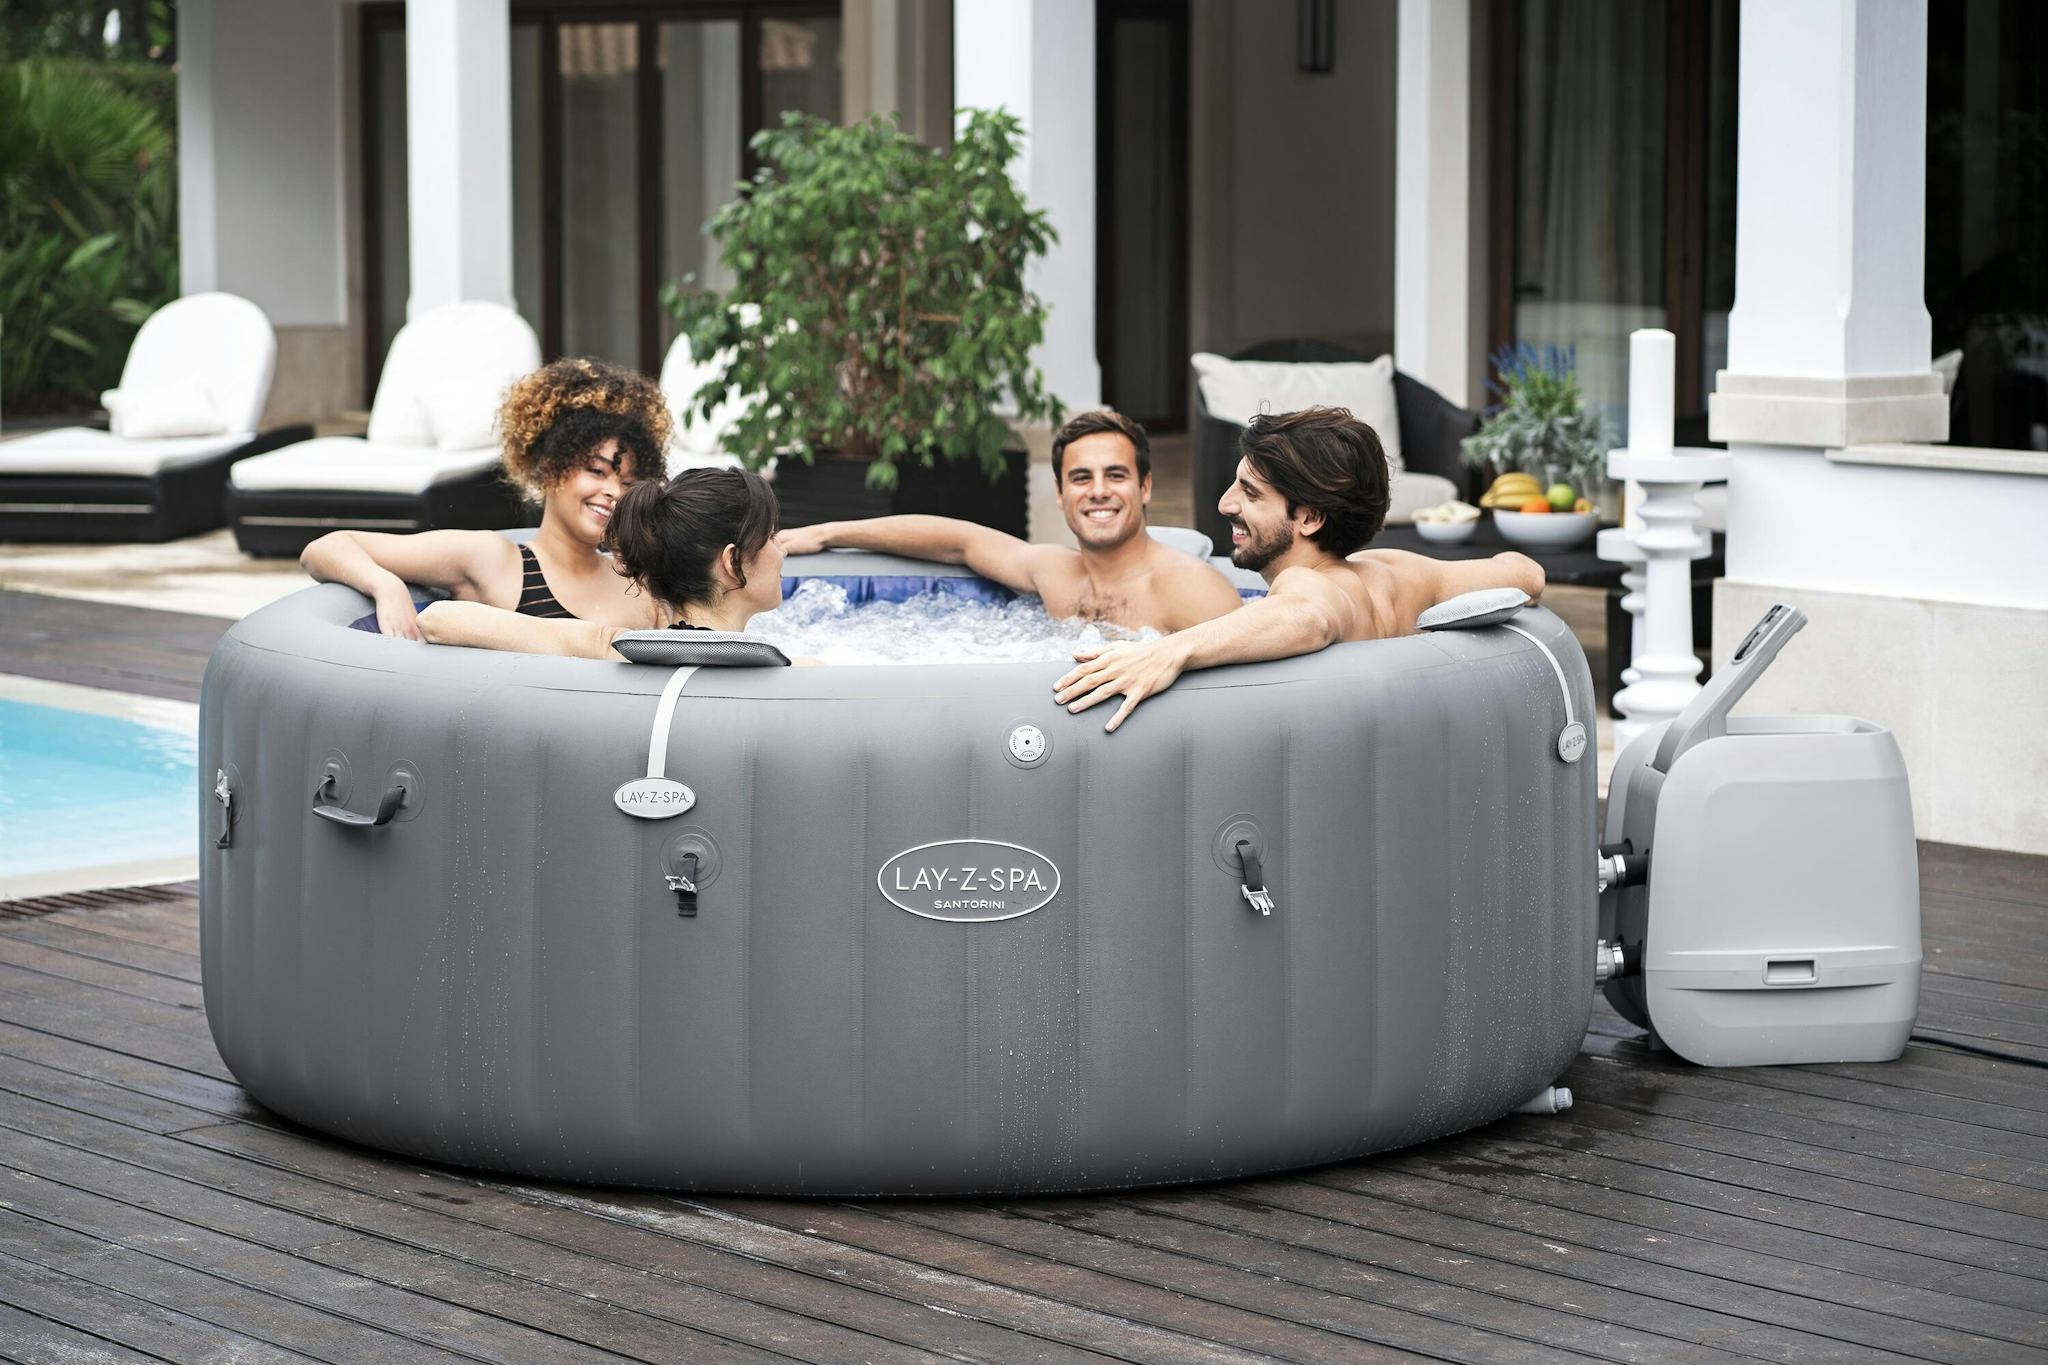 Spas Gonflables Spa gonflable rond Lay-Z-Spa Santorini Hydrojet pro™ 5 - 7 personnes Wifi Bestway 7